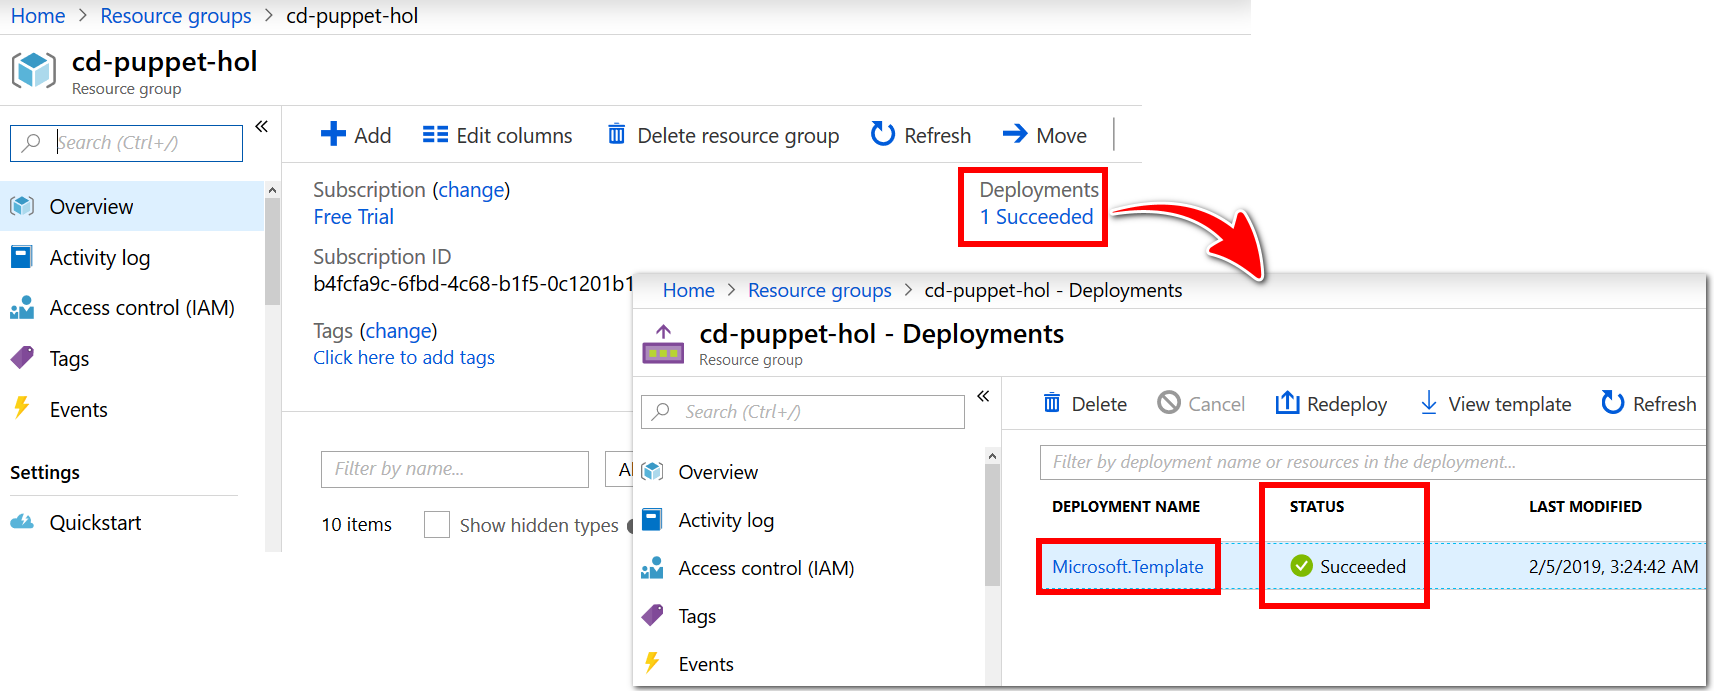 Screenshot of the Resource Group Overview and Deployments panes in Azure Portal. The deployment succeeded message for the cd-puppet-hol Resource Group is highlighted to illustrate how to access the Deployments pane from the Resource Group Overview pane in Azure Portal. In the Deployments pane, the Deployment Status for the Microsoft.Template resource is set at succeeded and is highlighted to illustrate how to verify the success of the Puppet ARM template deployment. In the Deployments pane, the Deployment Name for the Microsoft.Template resource is also highlighted to illustrate how to access the Microsoft.Template resource from inside the Deployments pane.